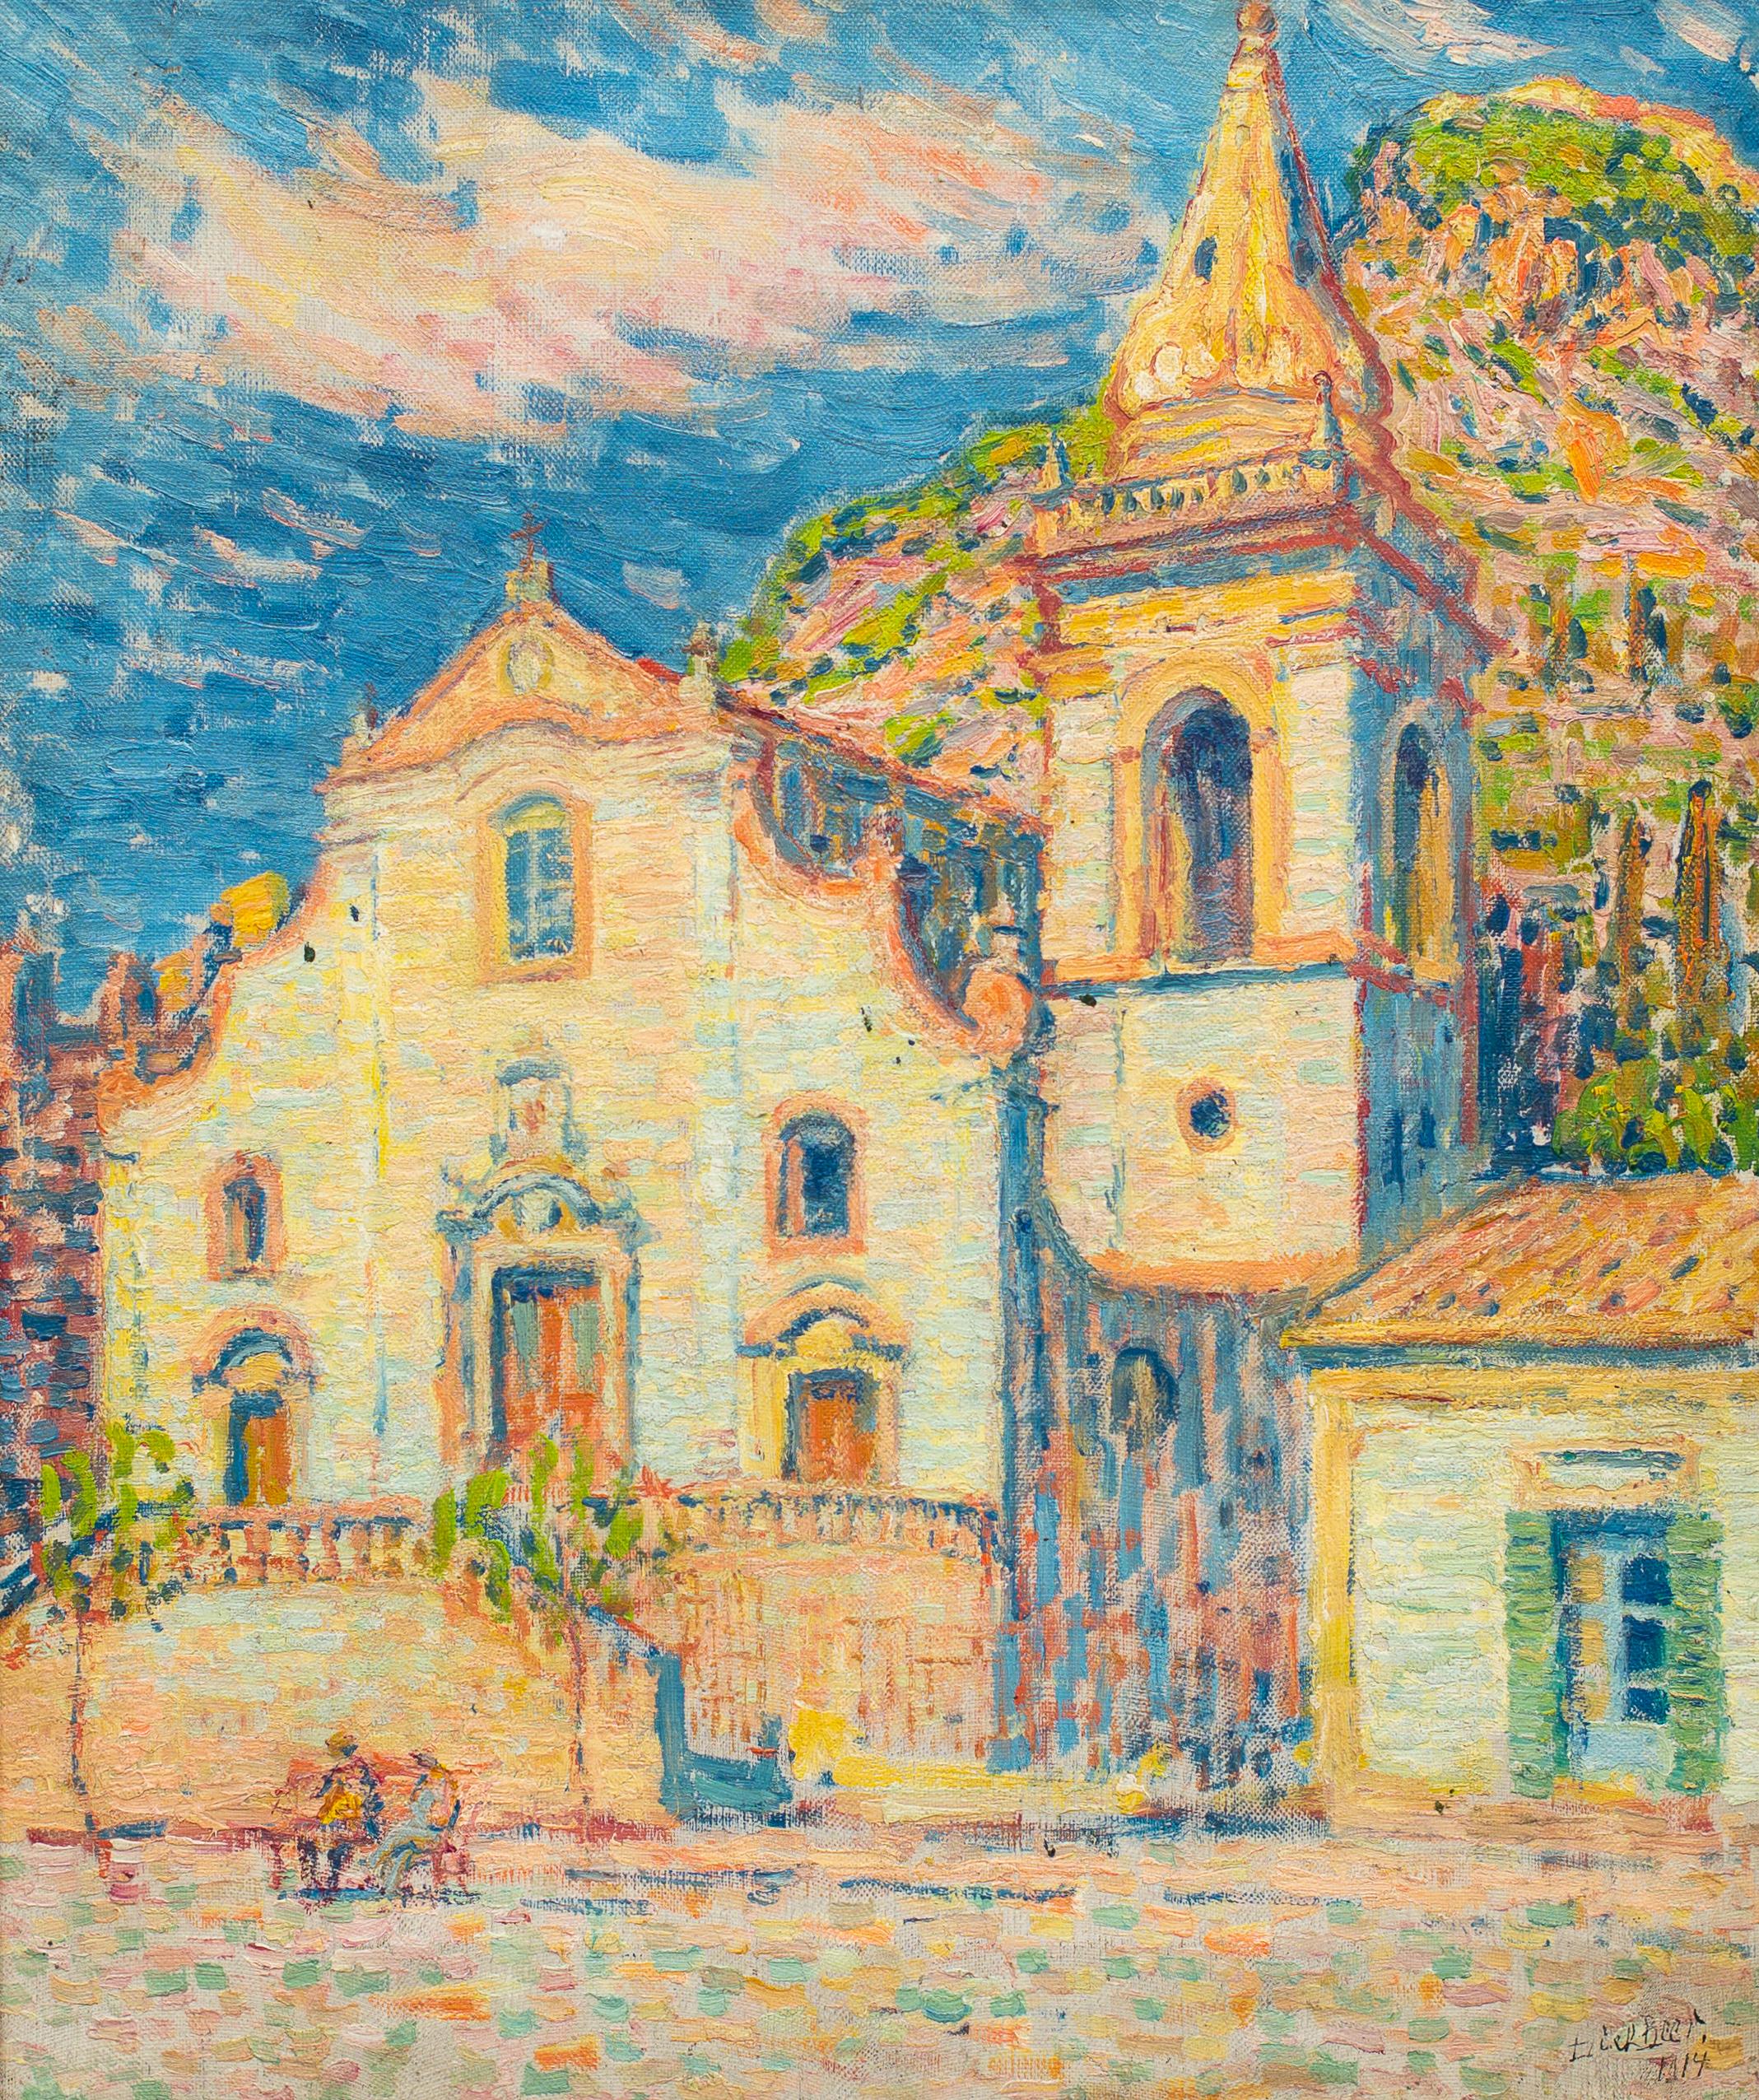 Dick Beer Figurative Painting - Post-Impressionist Painting The Church in Taormina, Sicily, 1914